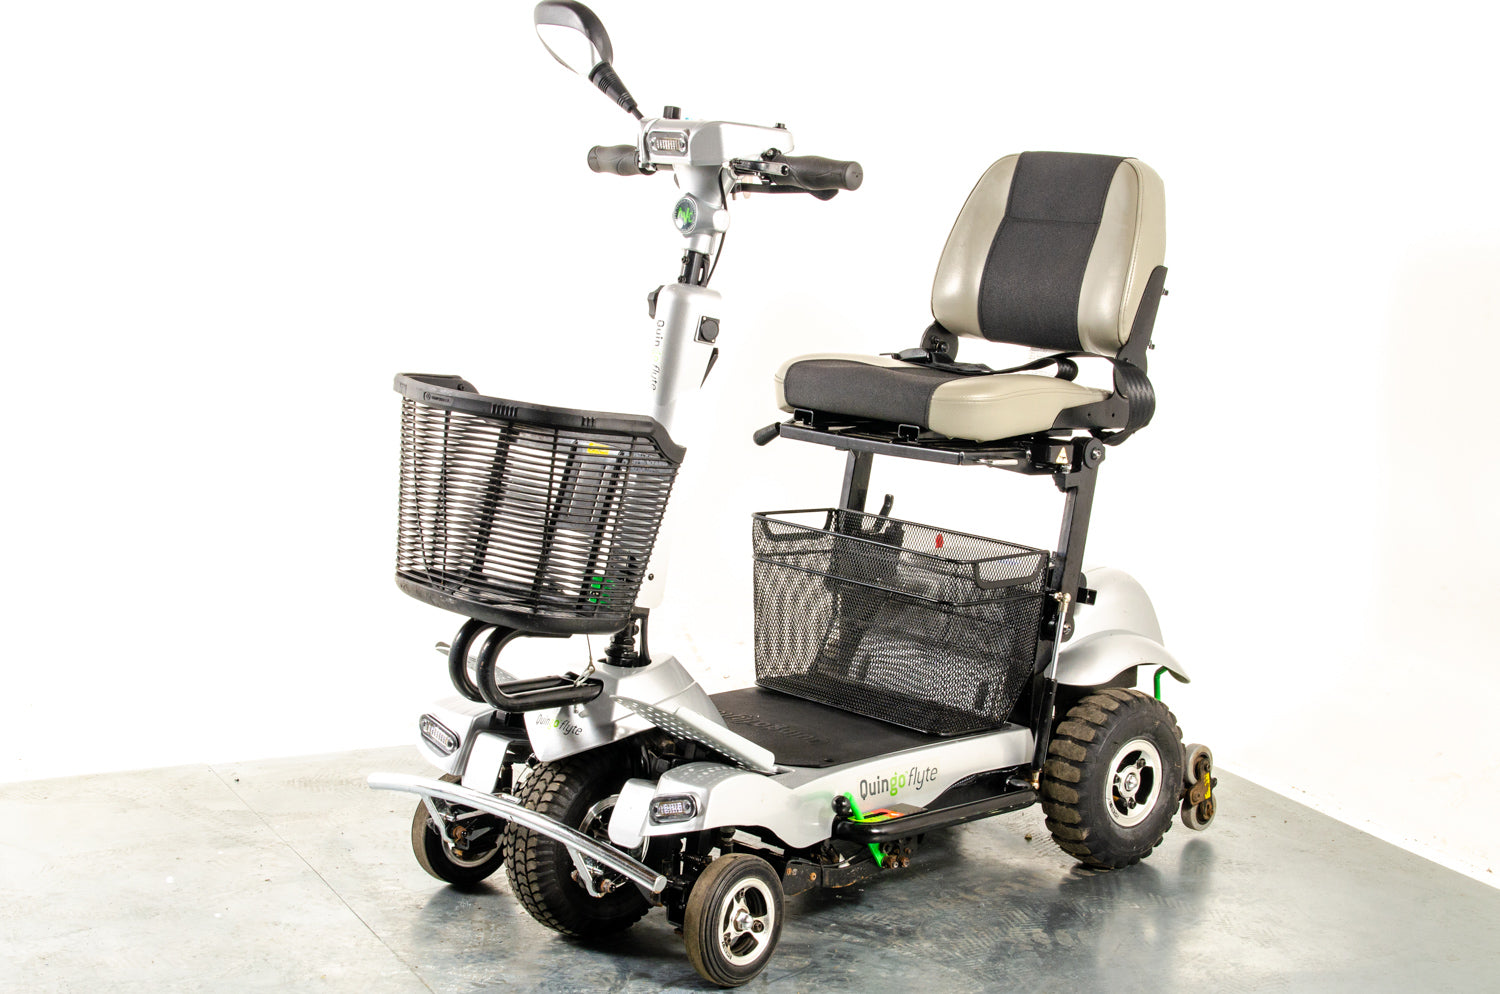 Quingo Flyte Used Mobility Scooter 5 Wheel Luxury Folding Boot All-Terrain